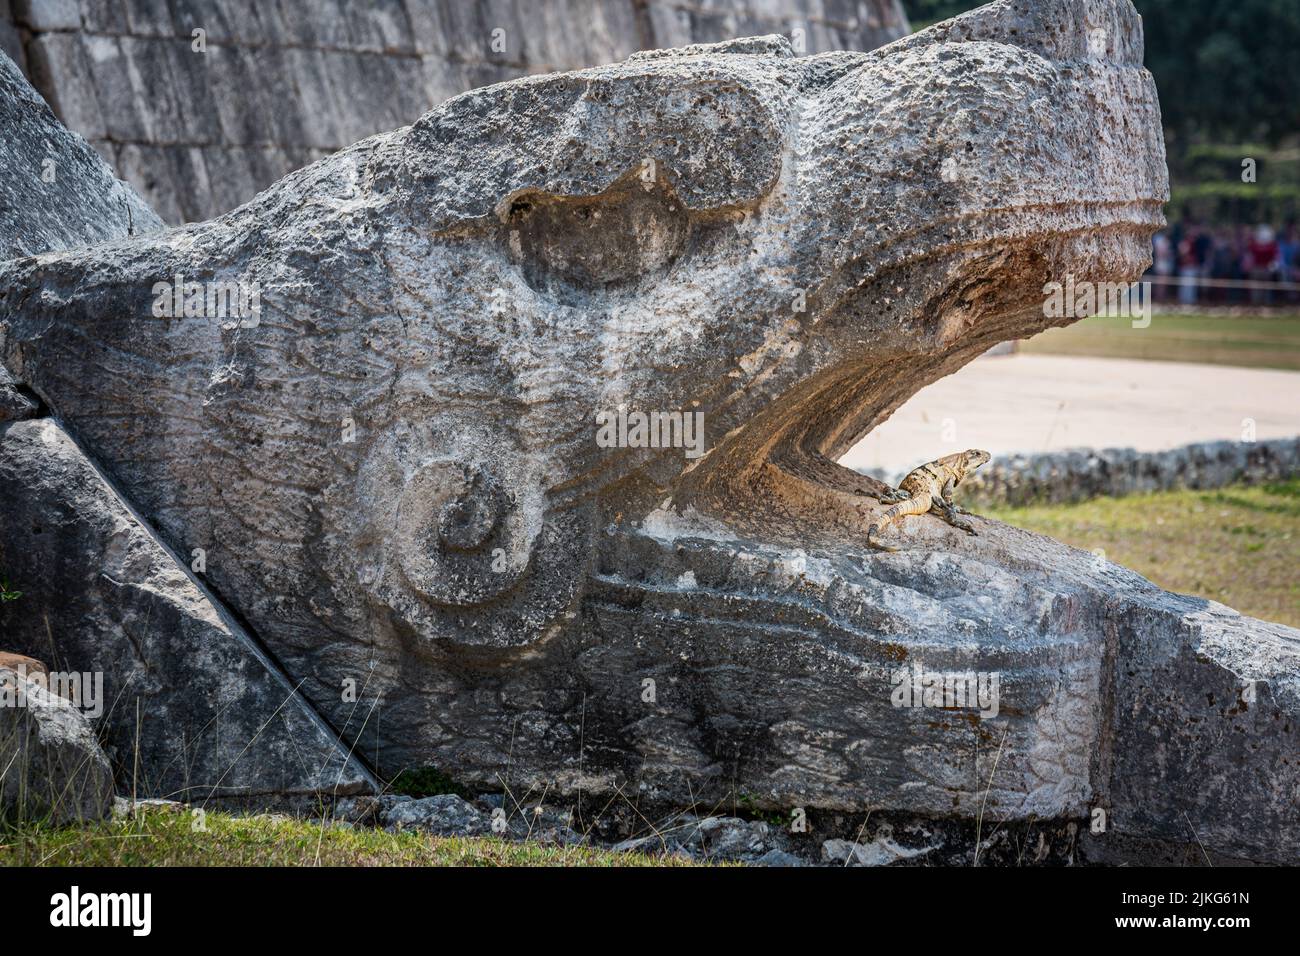 Chichen Itza kukulcan snake with lizard reptile in the open mouth, Mexico Stock Photo